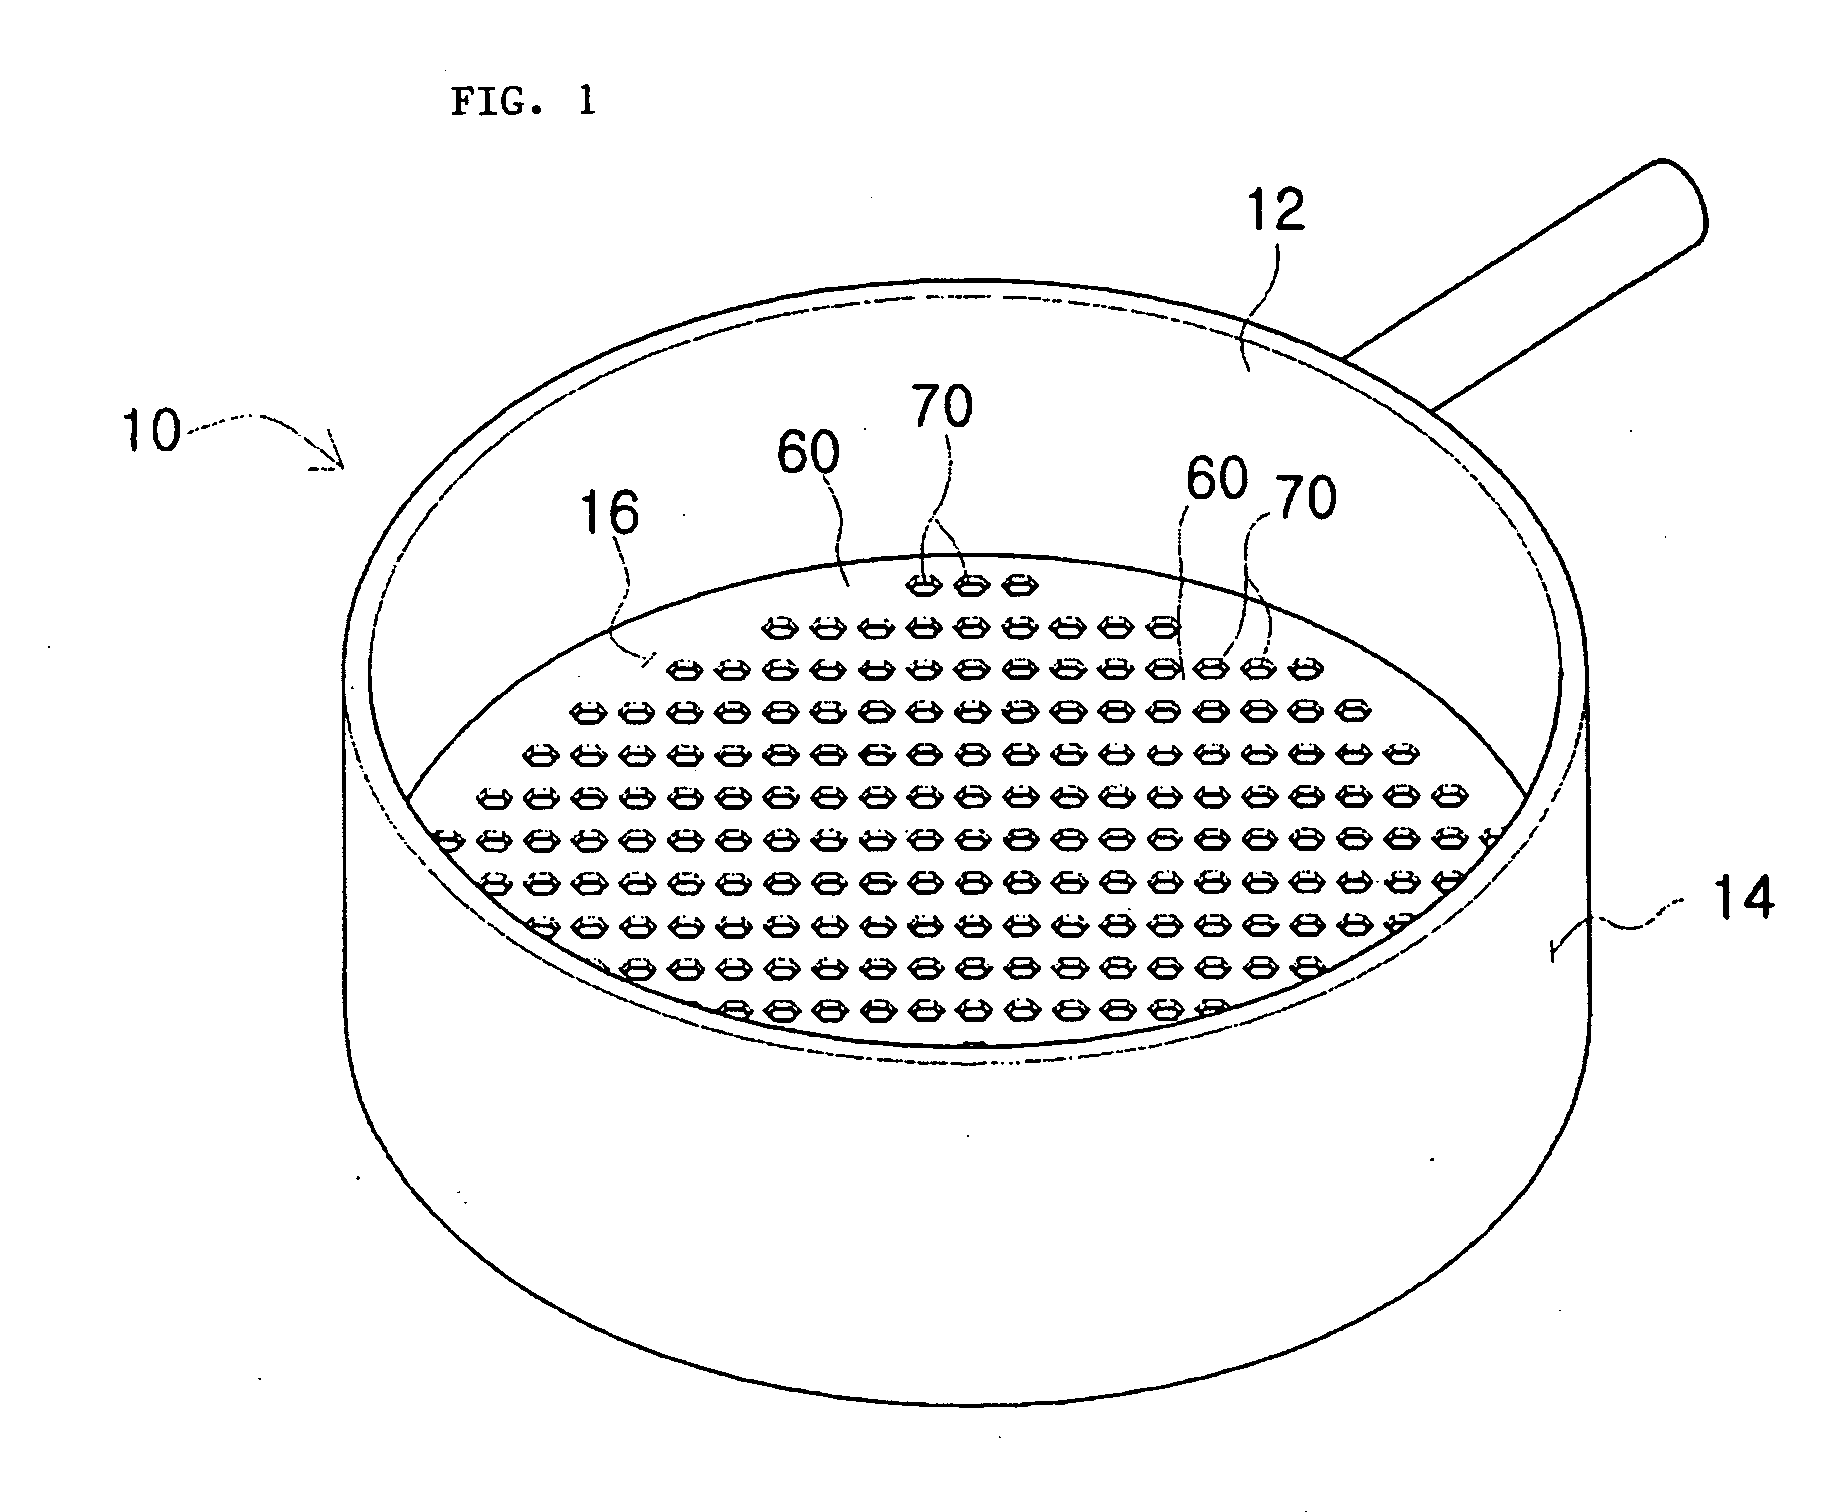 Method for manufacturing cooking vessel